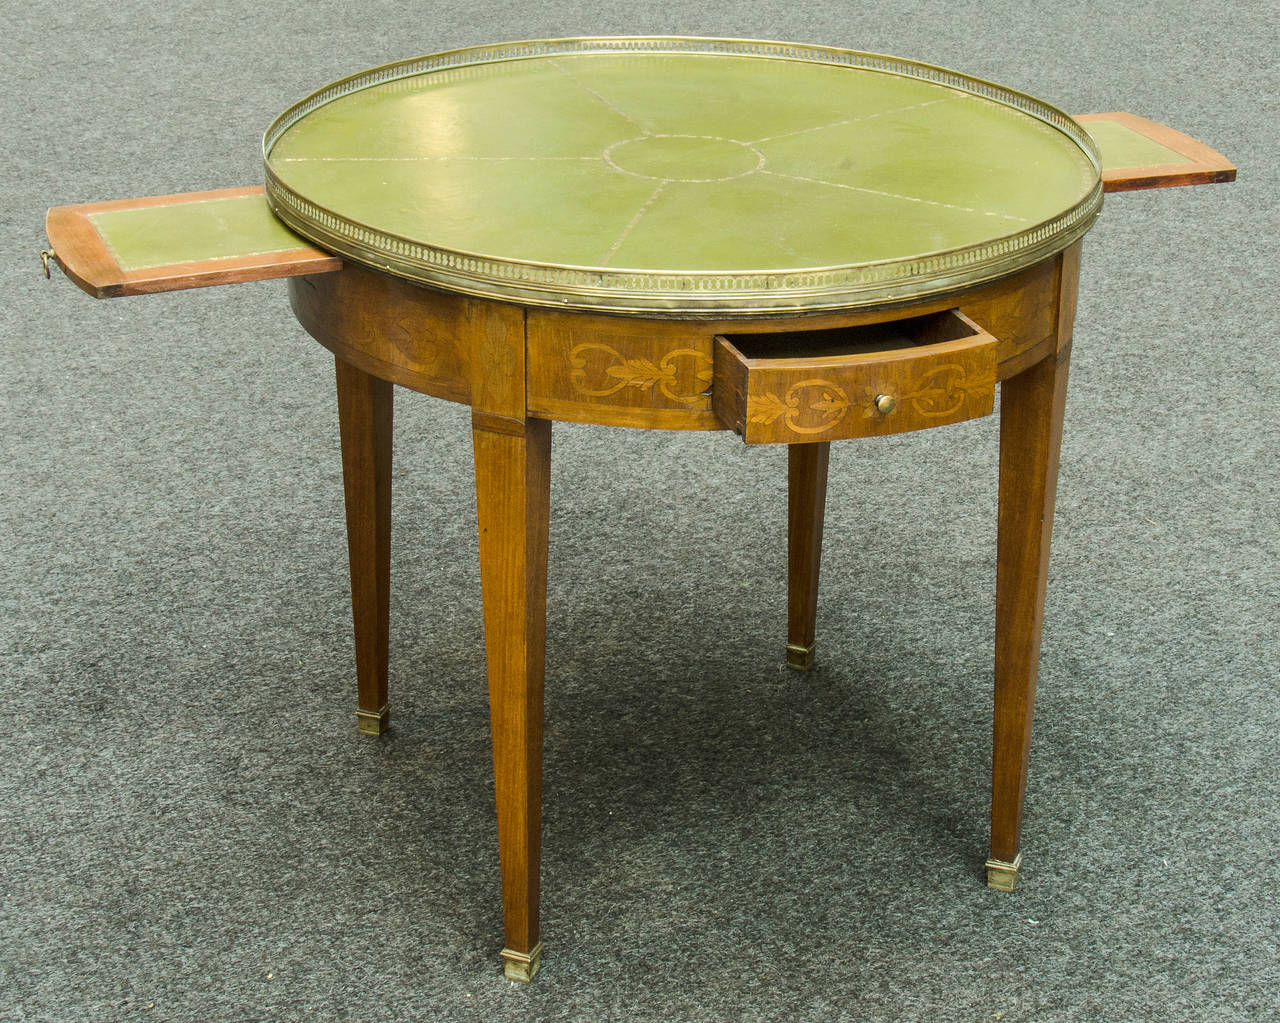 A bouillotte table was originally created for a card game of the same name. This one has a leather gilt tooled top with a pierced gallery. The apron has marquetry inlay. There are two drawers and two slides. Today these tables are great occasional